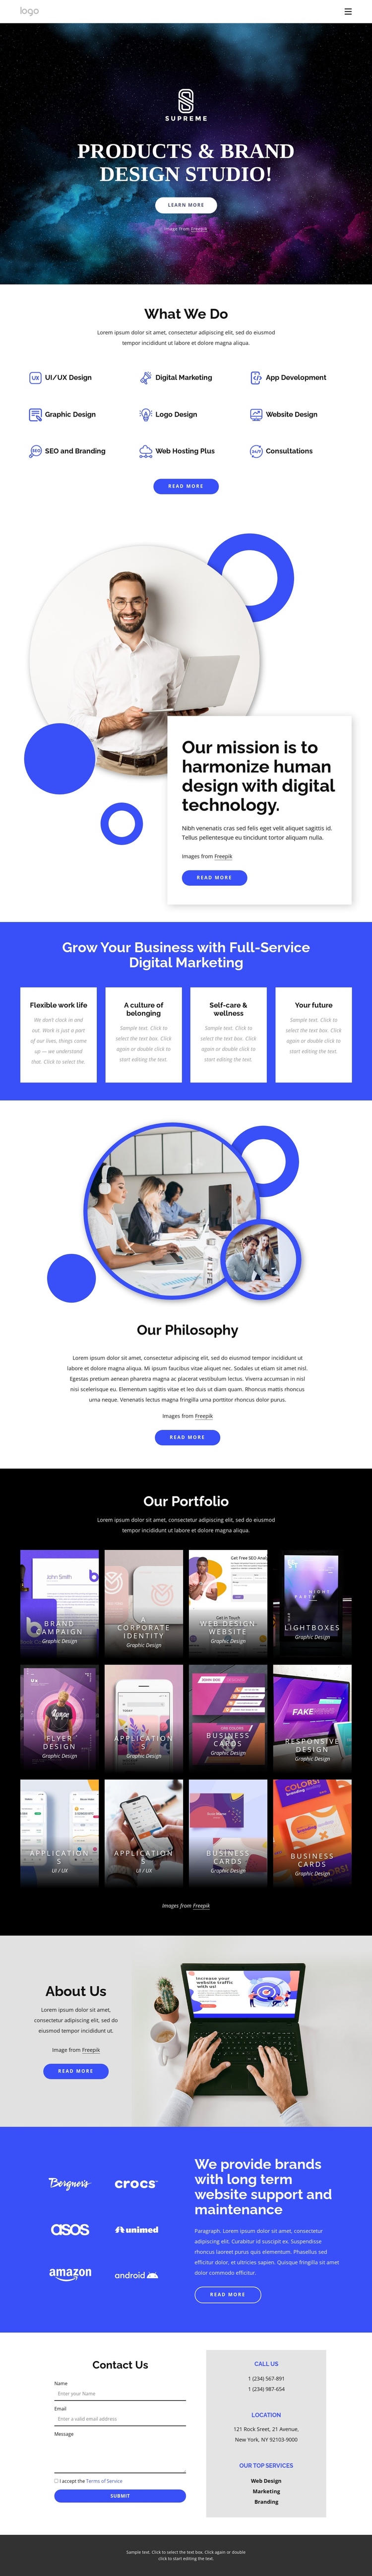 Products and brand design studio One Page Template